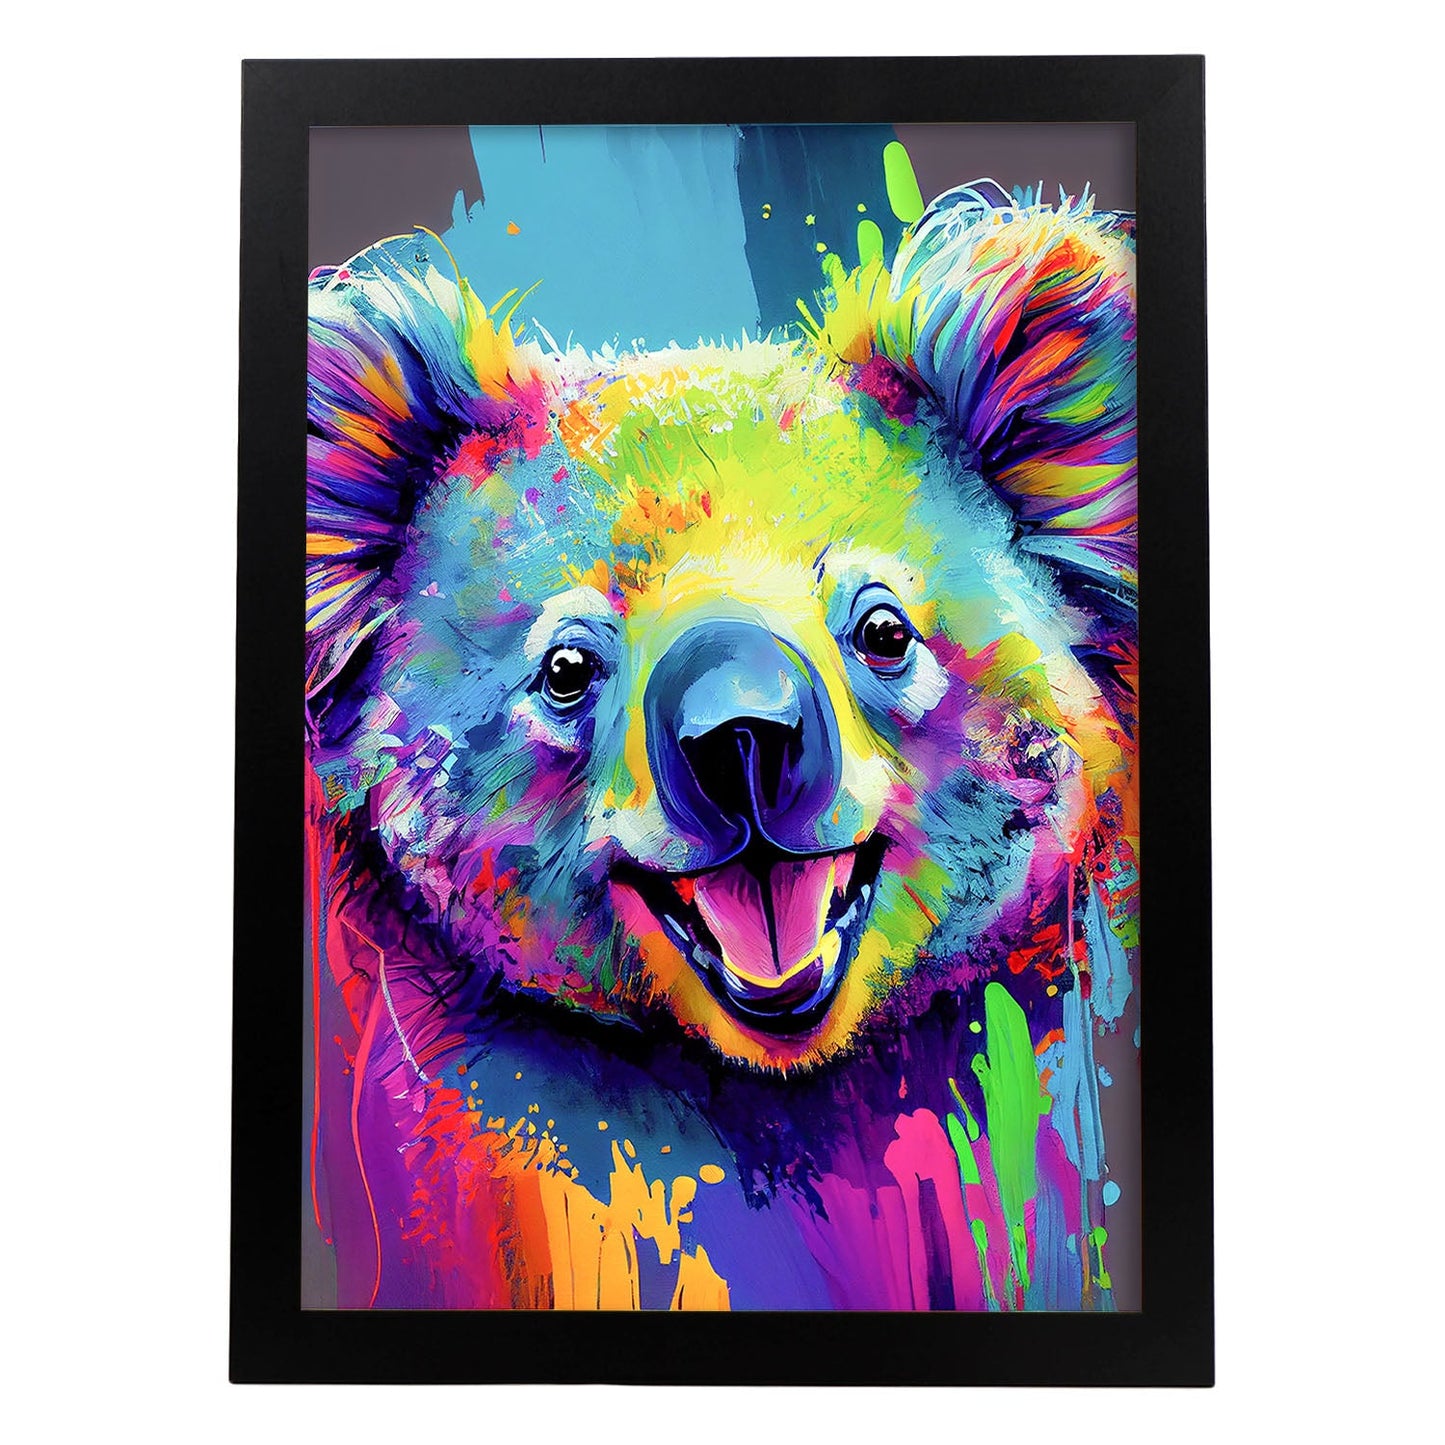 Nacnic Abstract smiling Koala in Lisa Fran Style_3. Aesthetic Wall Art Prints for Bedroom or Living Room Design.